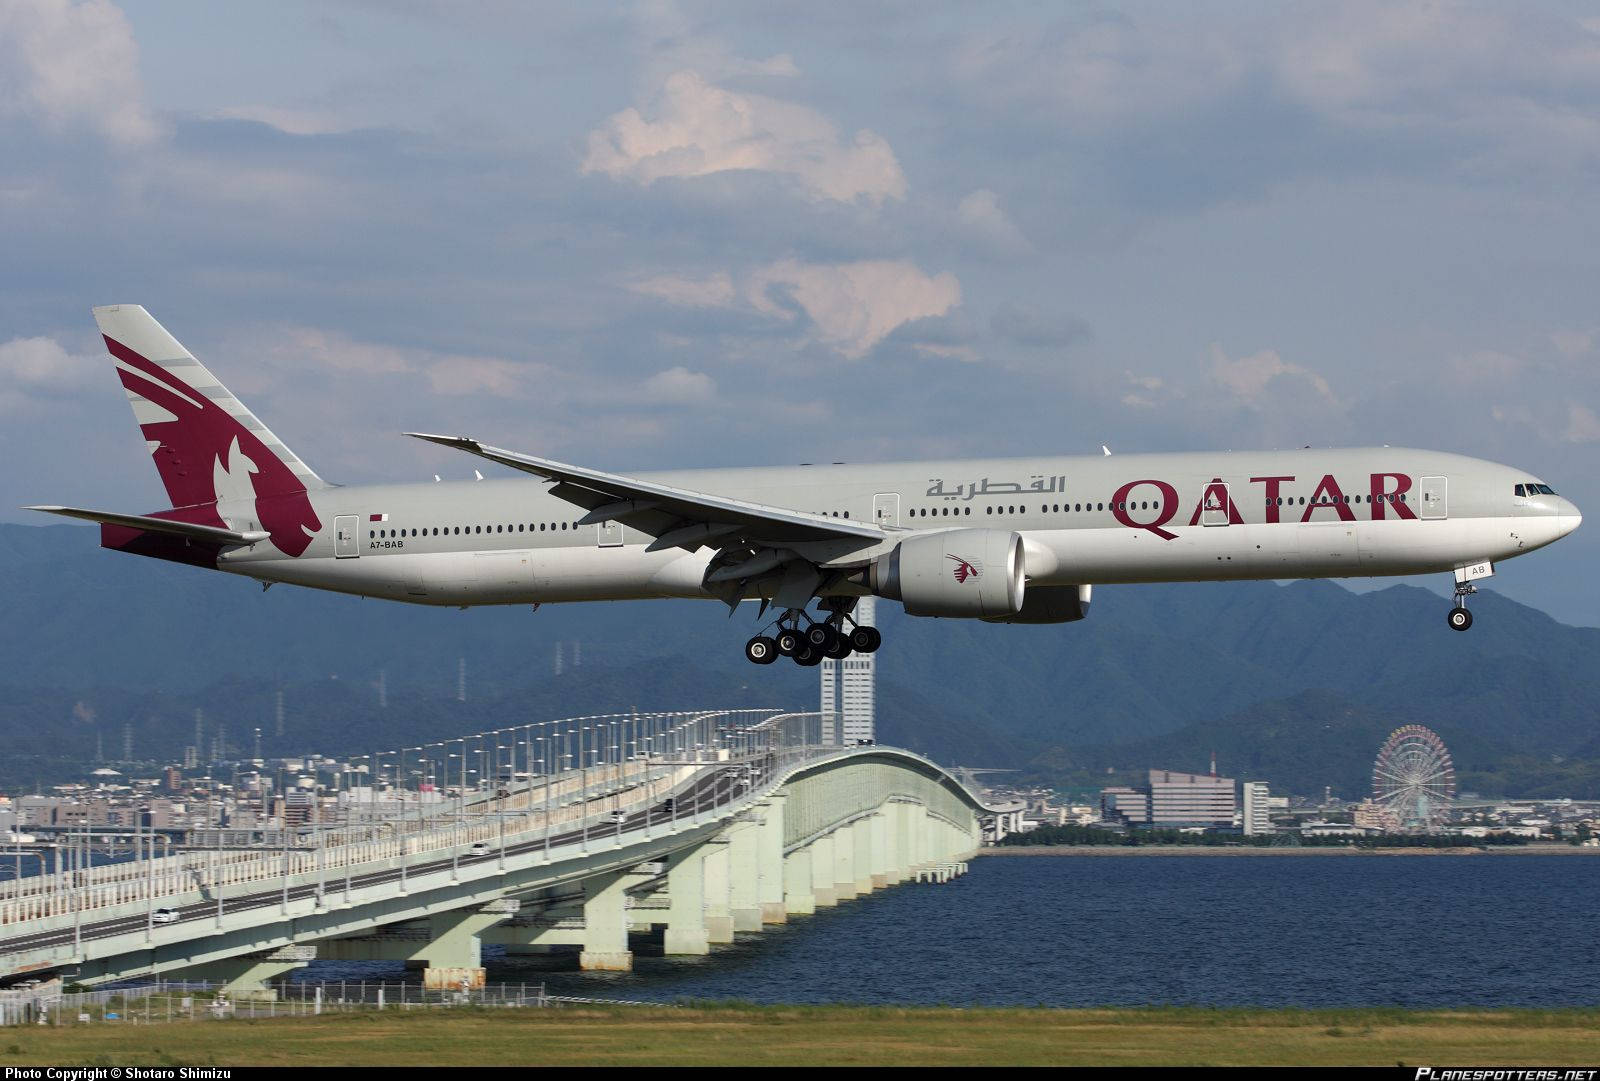 Qatar Aircraft Takes Off Background